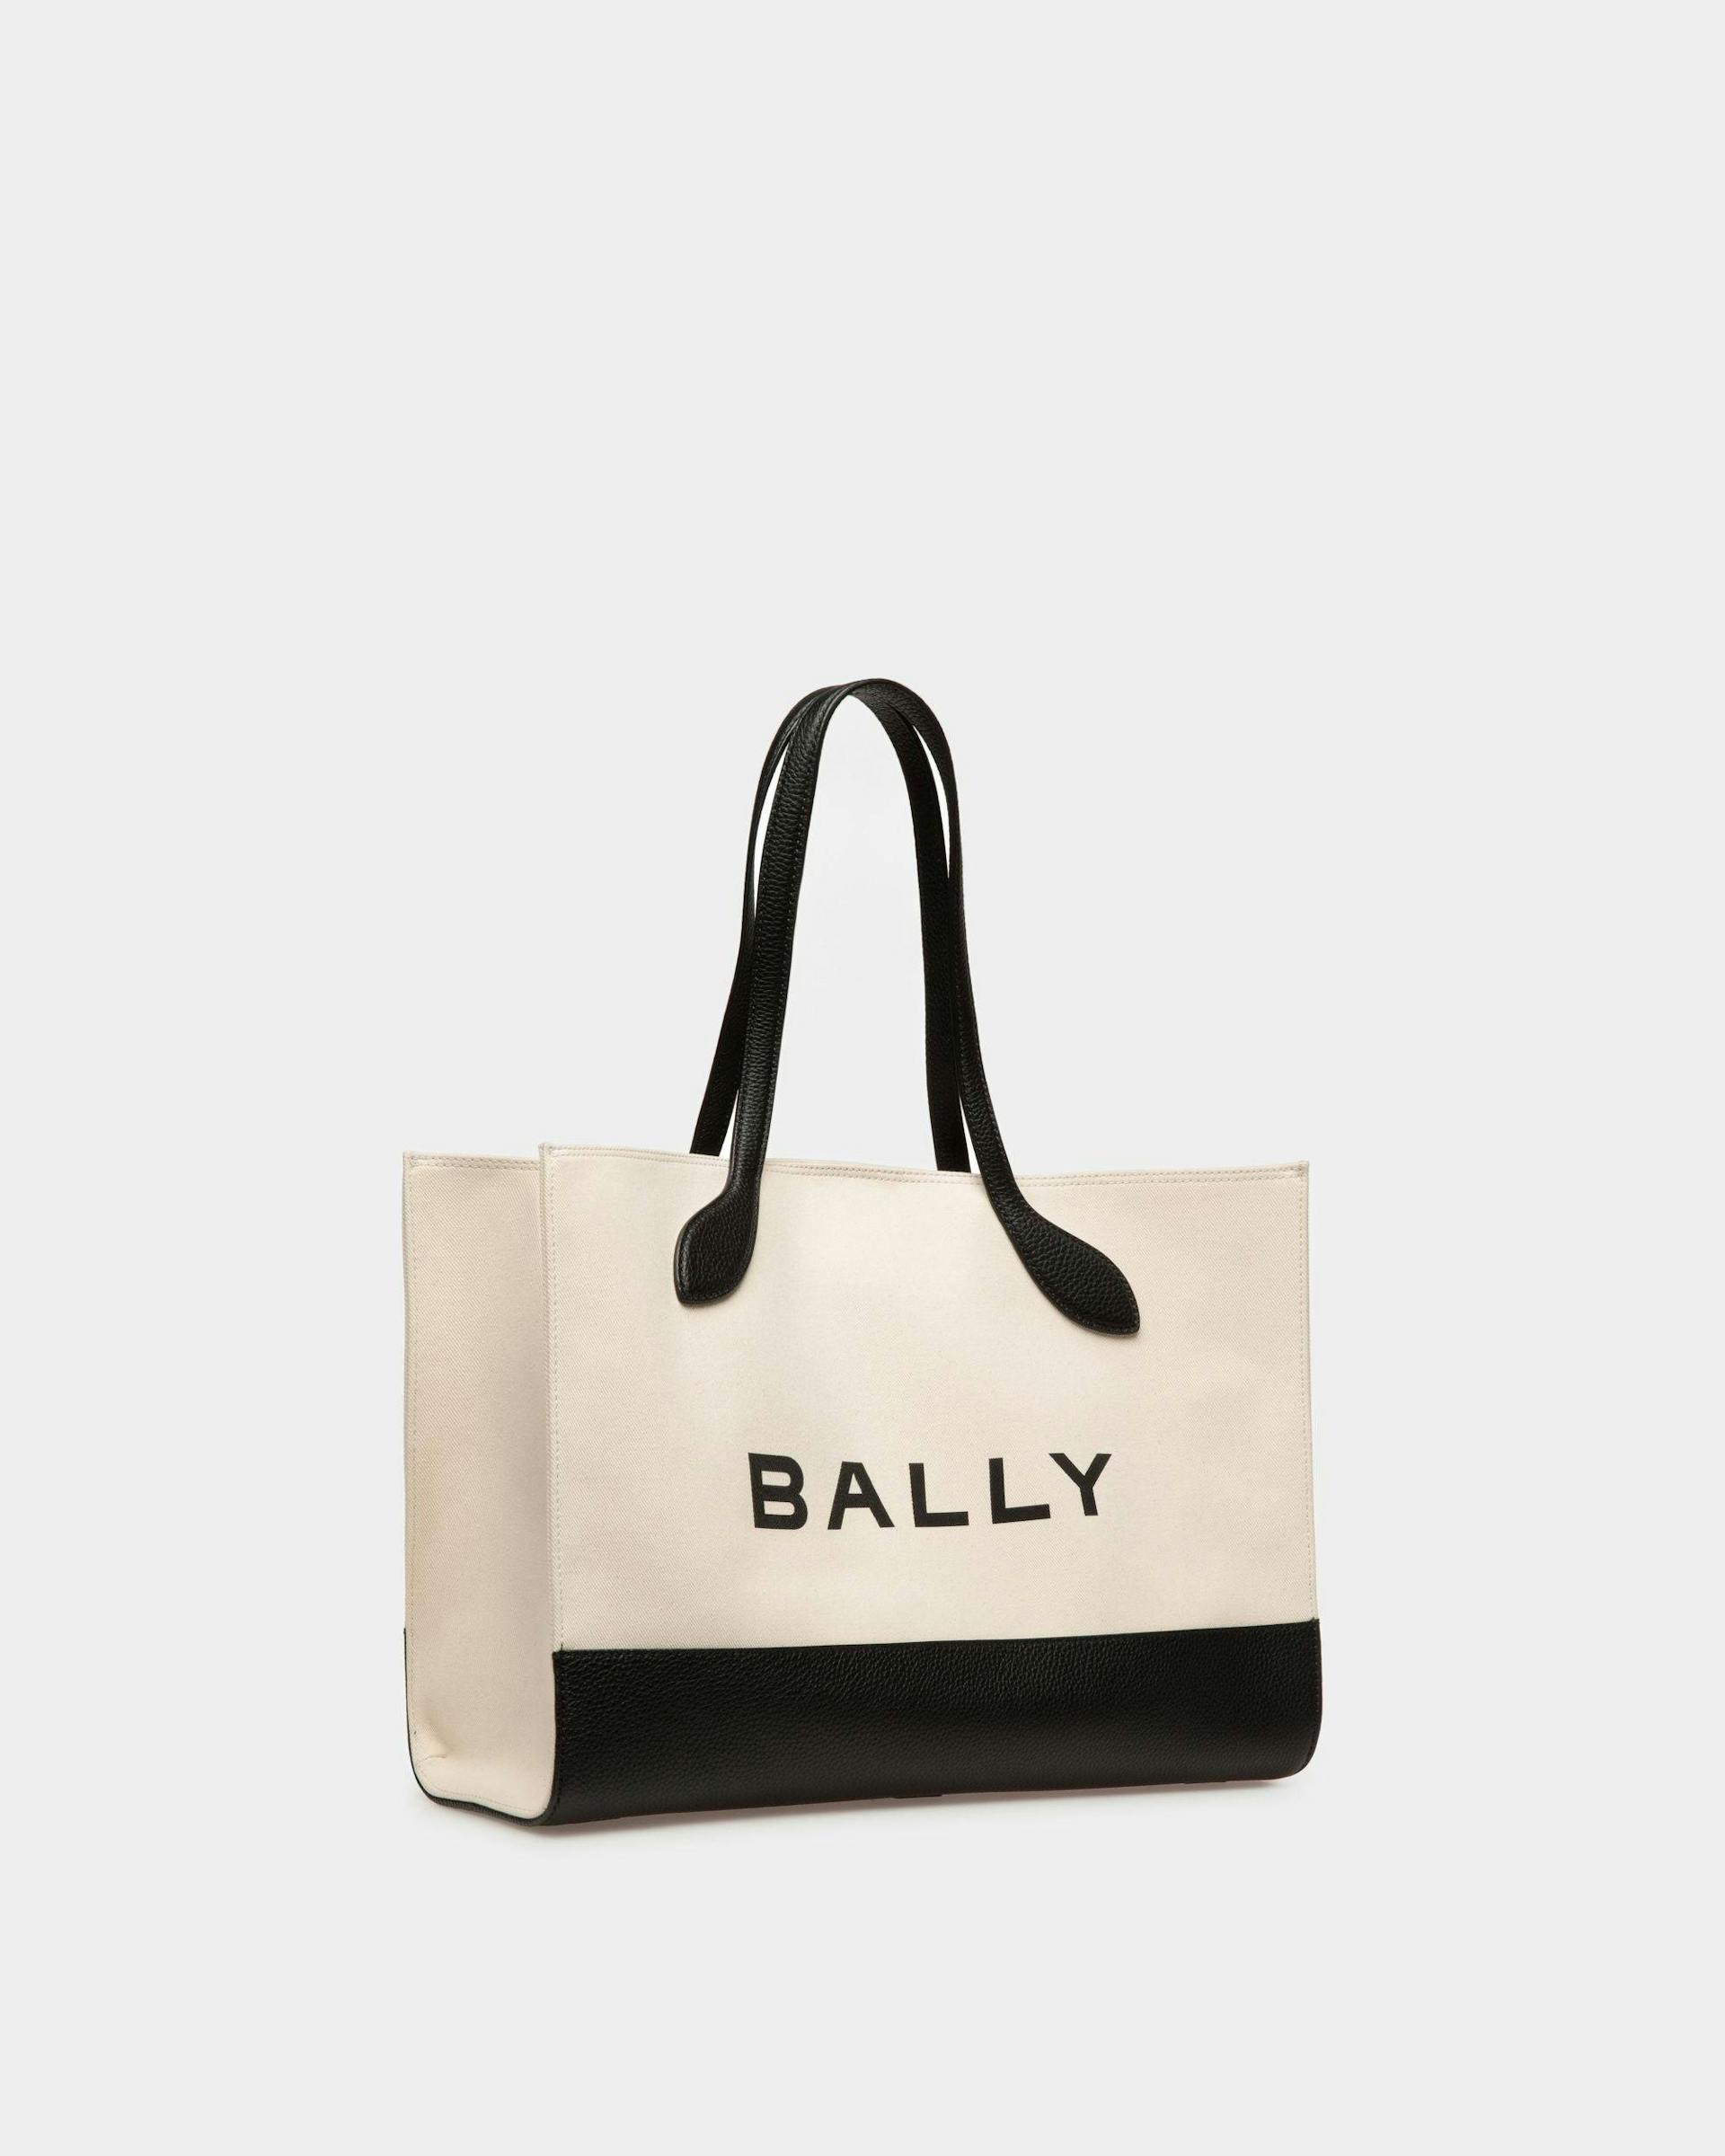 Keep On | Women's Tote Bag | Natural And Black Fabric | Bally